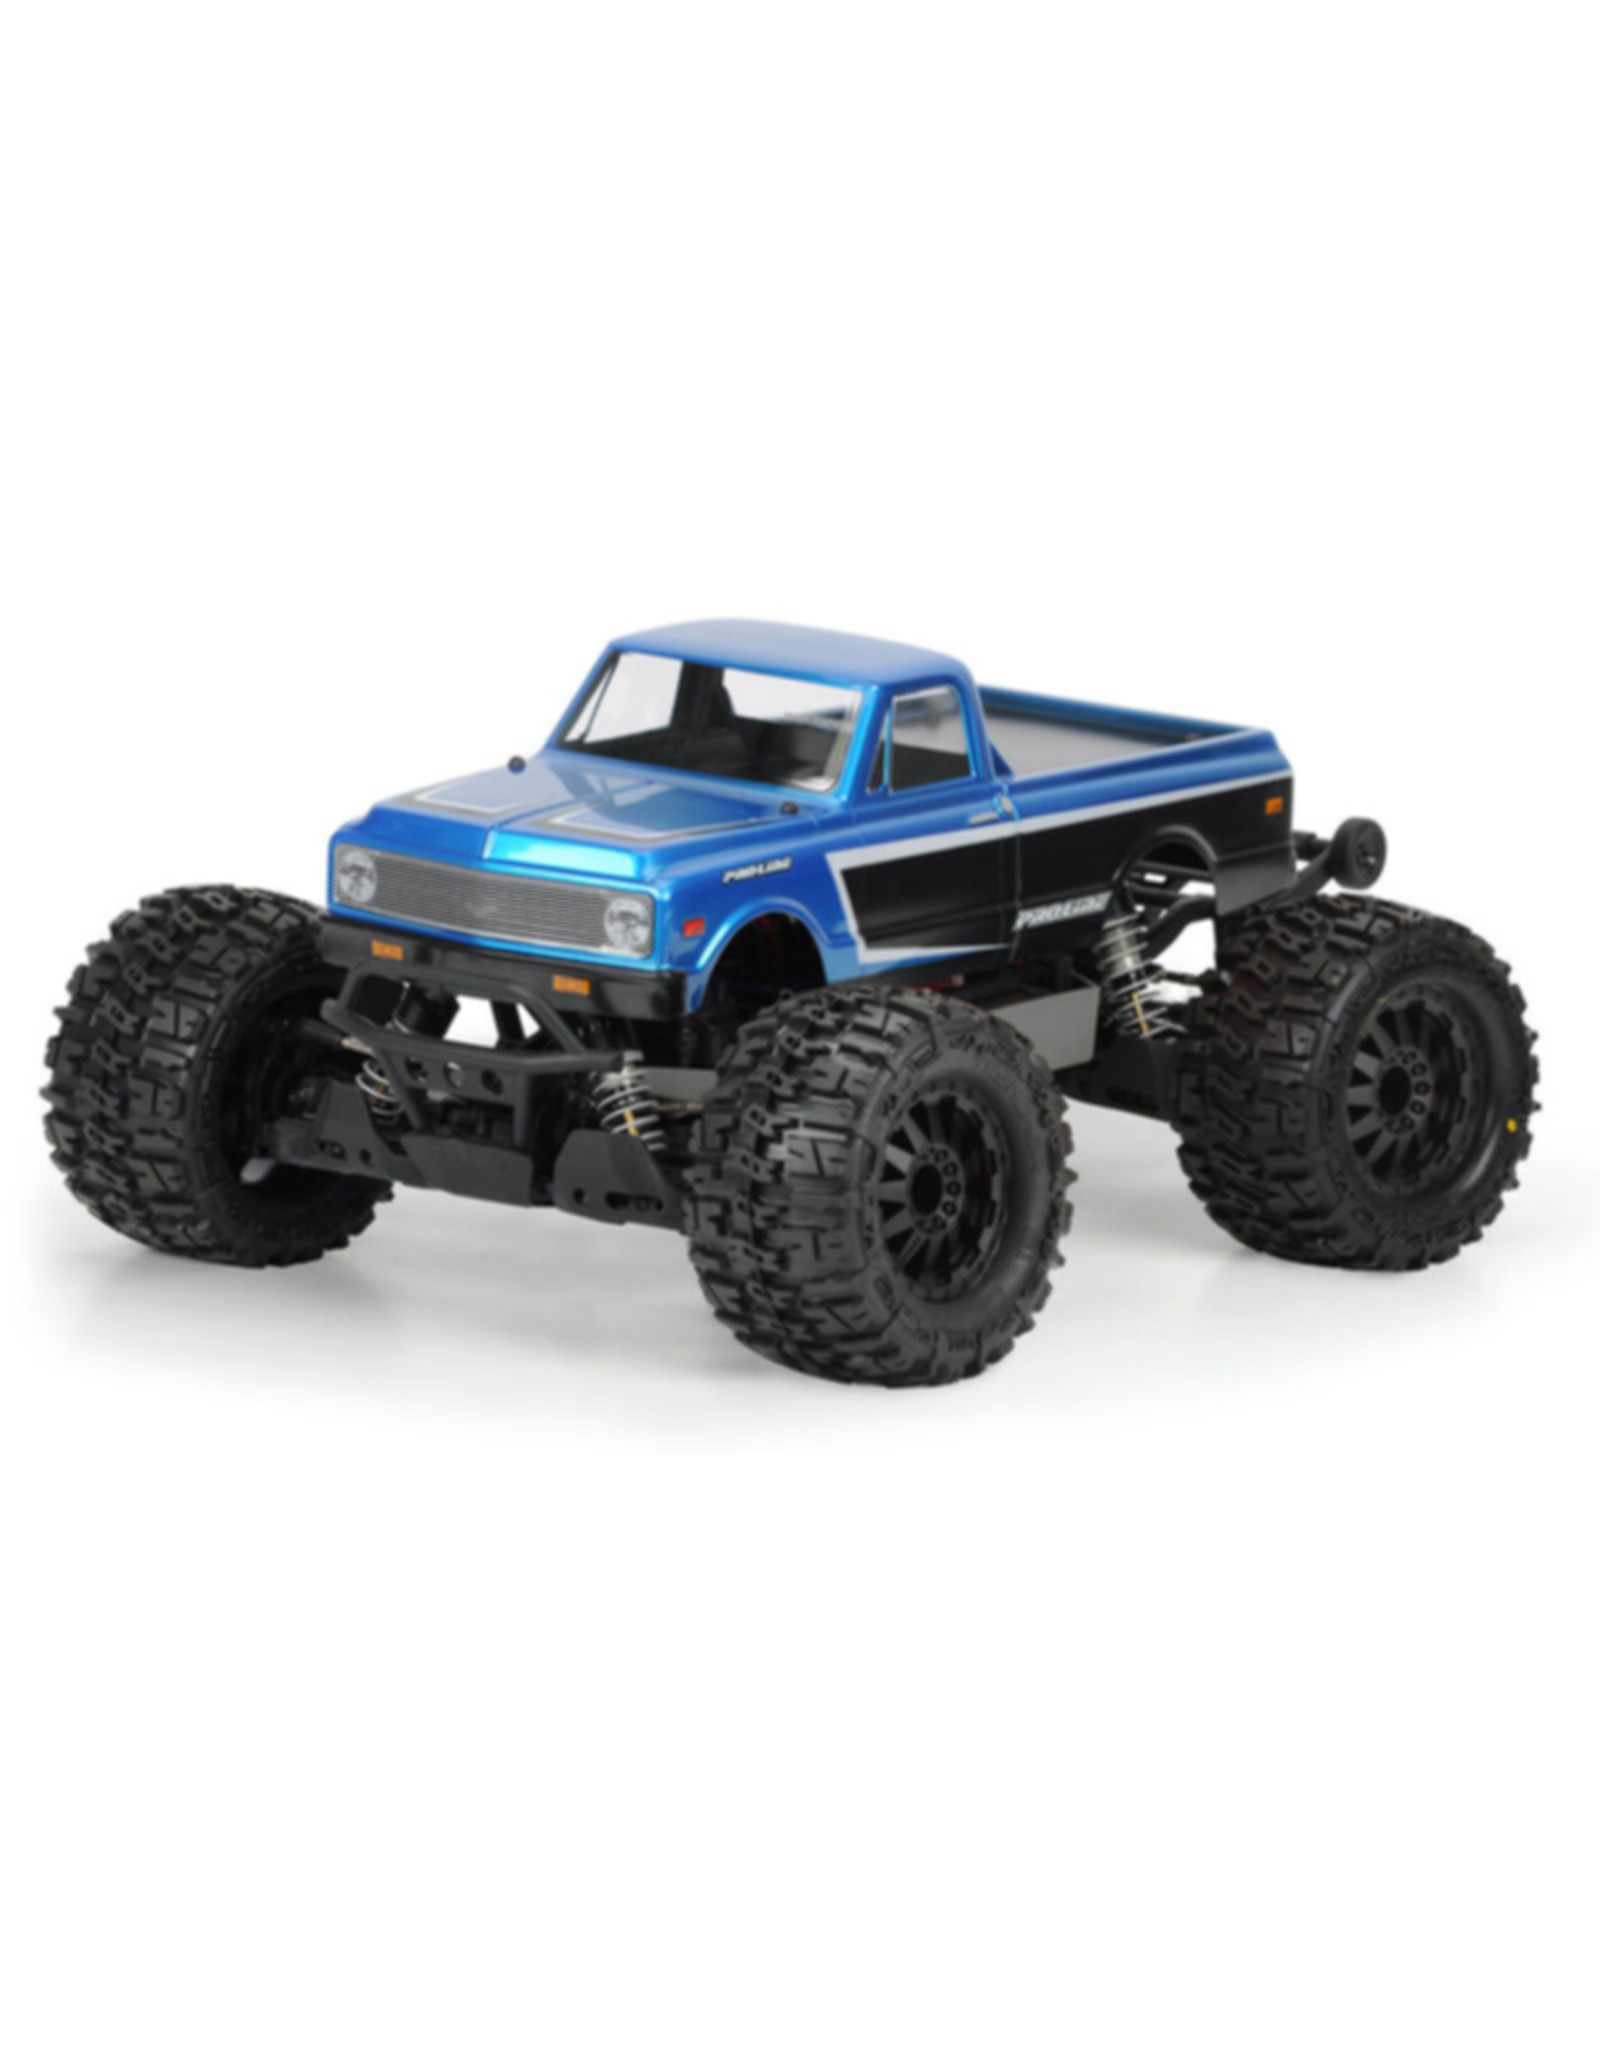 Pro-Line Racing PRO325100 1972 Chevy C10 Pick-Up Body, Clear: ST,NST,NR,NRU